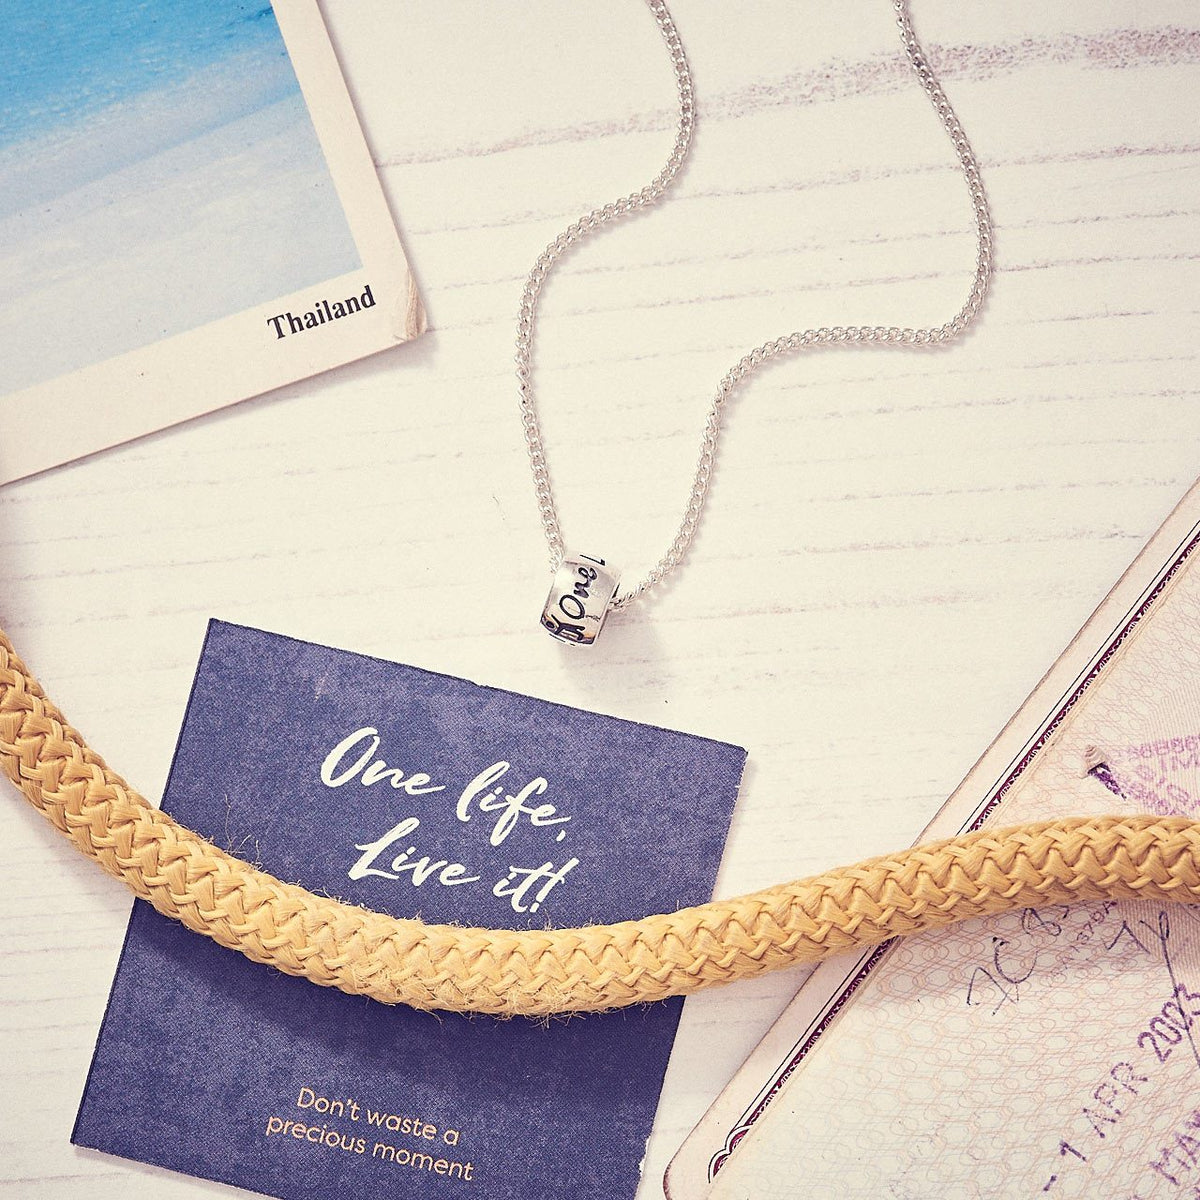 One Life, Live It! Solid Silver Adventurers and Traveler Necklace